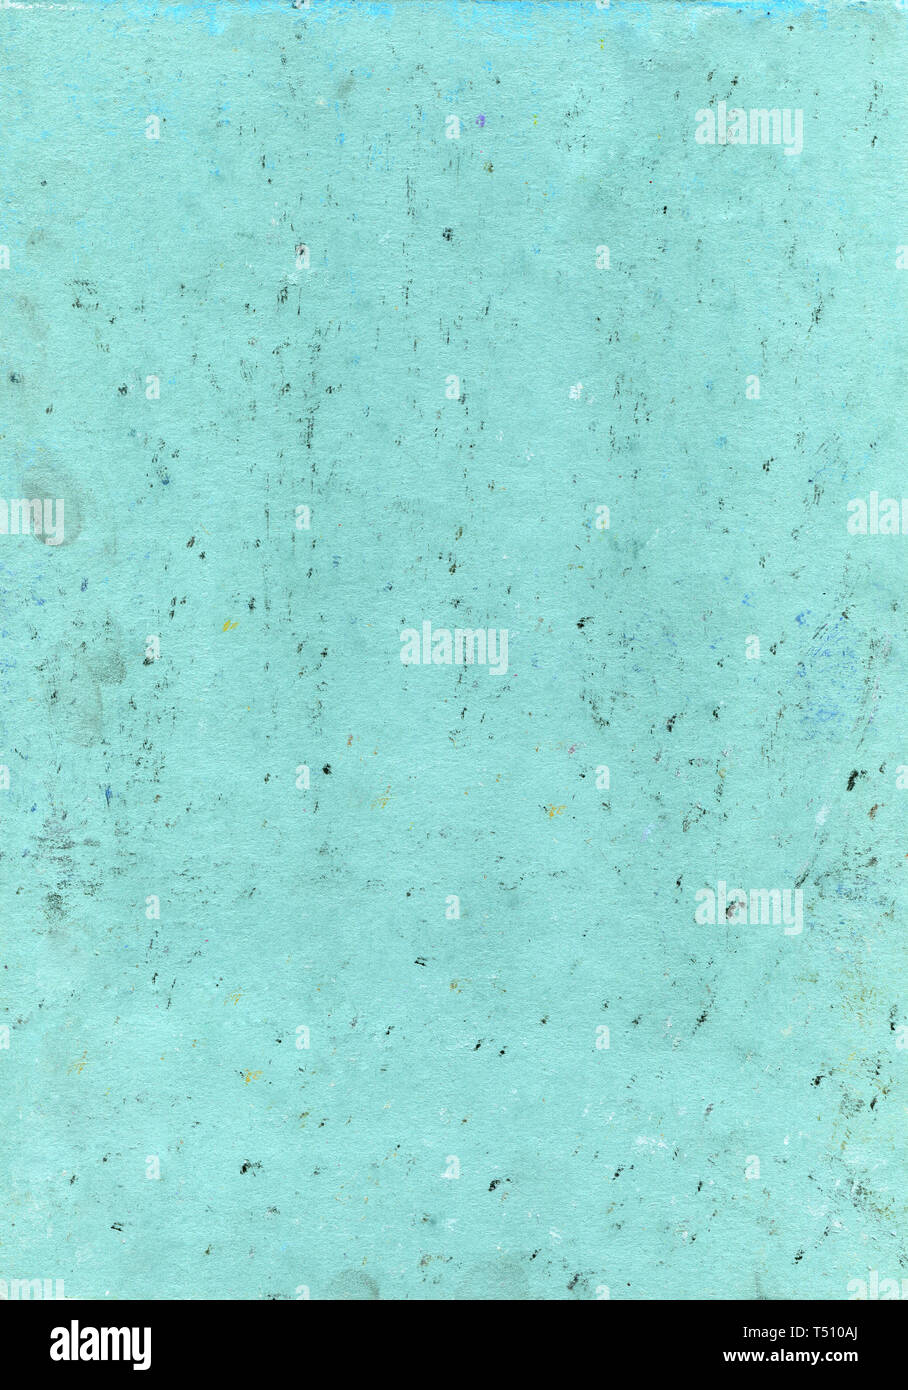 Abstract aqua background. Green background in grunge style with stains, scratches, fingerprints and multi-colored small dots. Paper texture Stock Photo